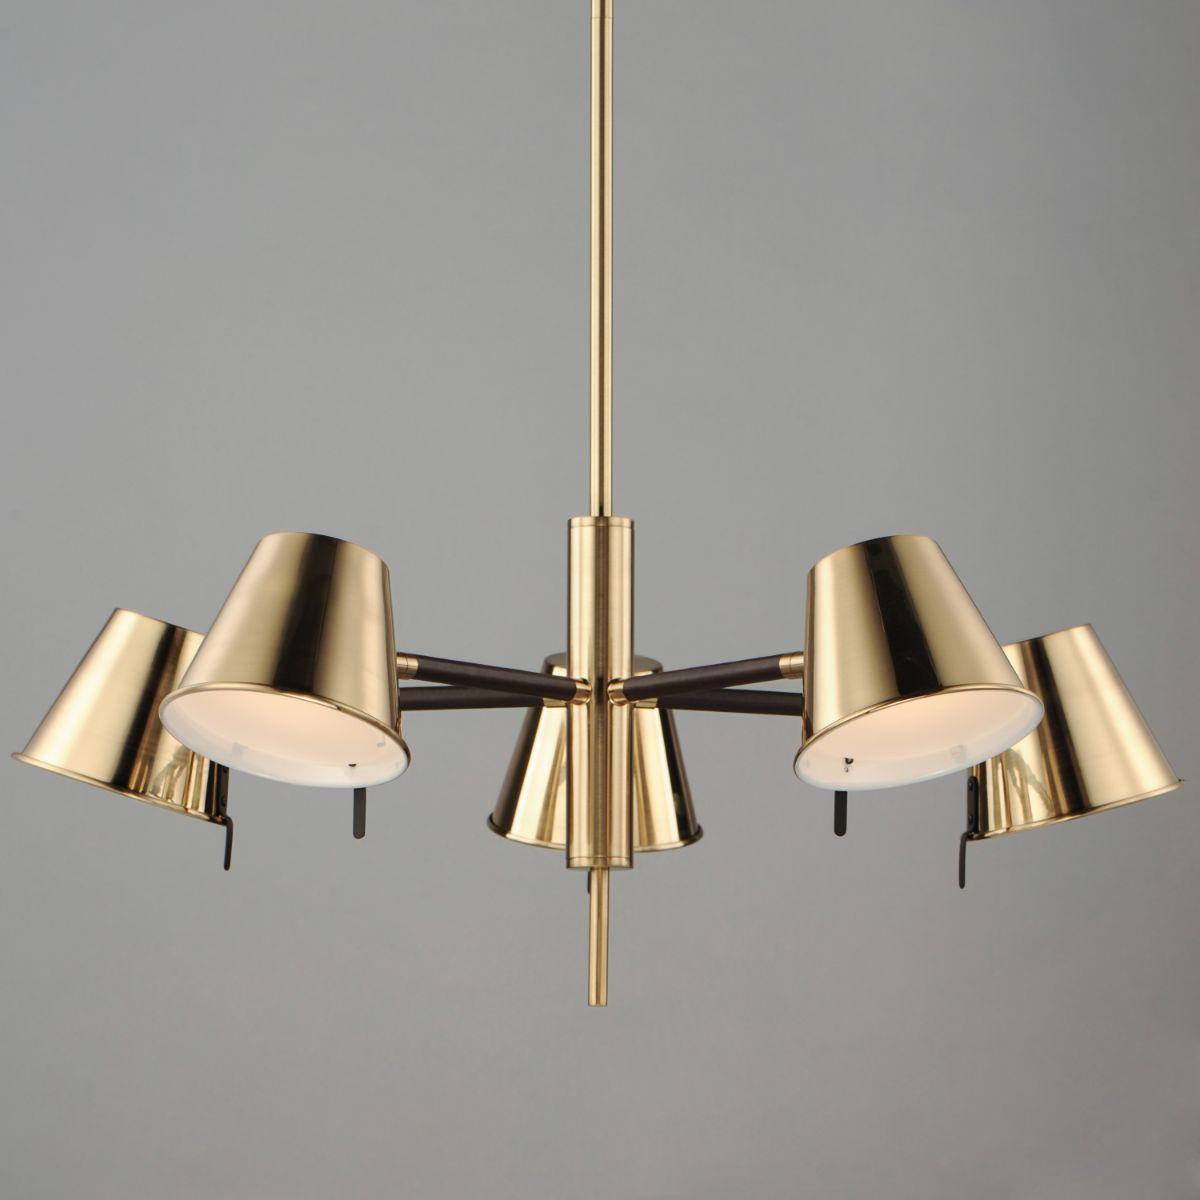 CARLO 28 in. 5 lights LED Chandelier Heritage Brass finish